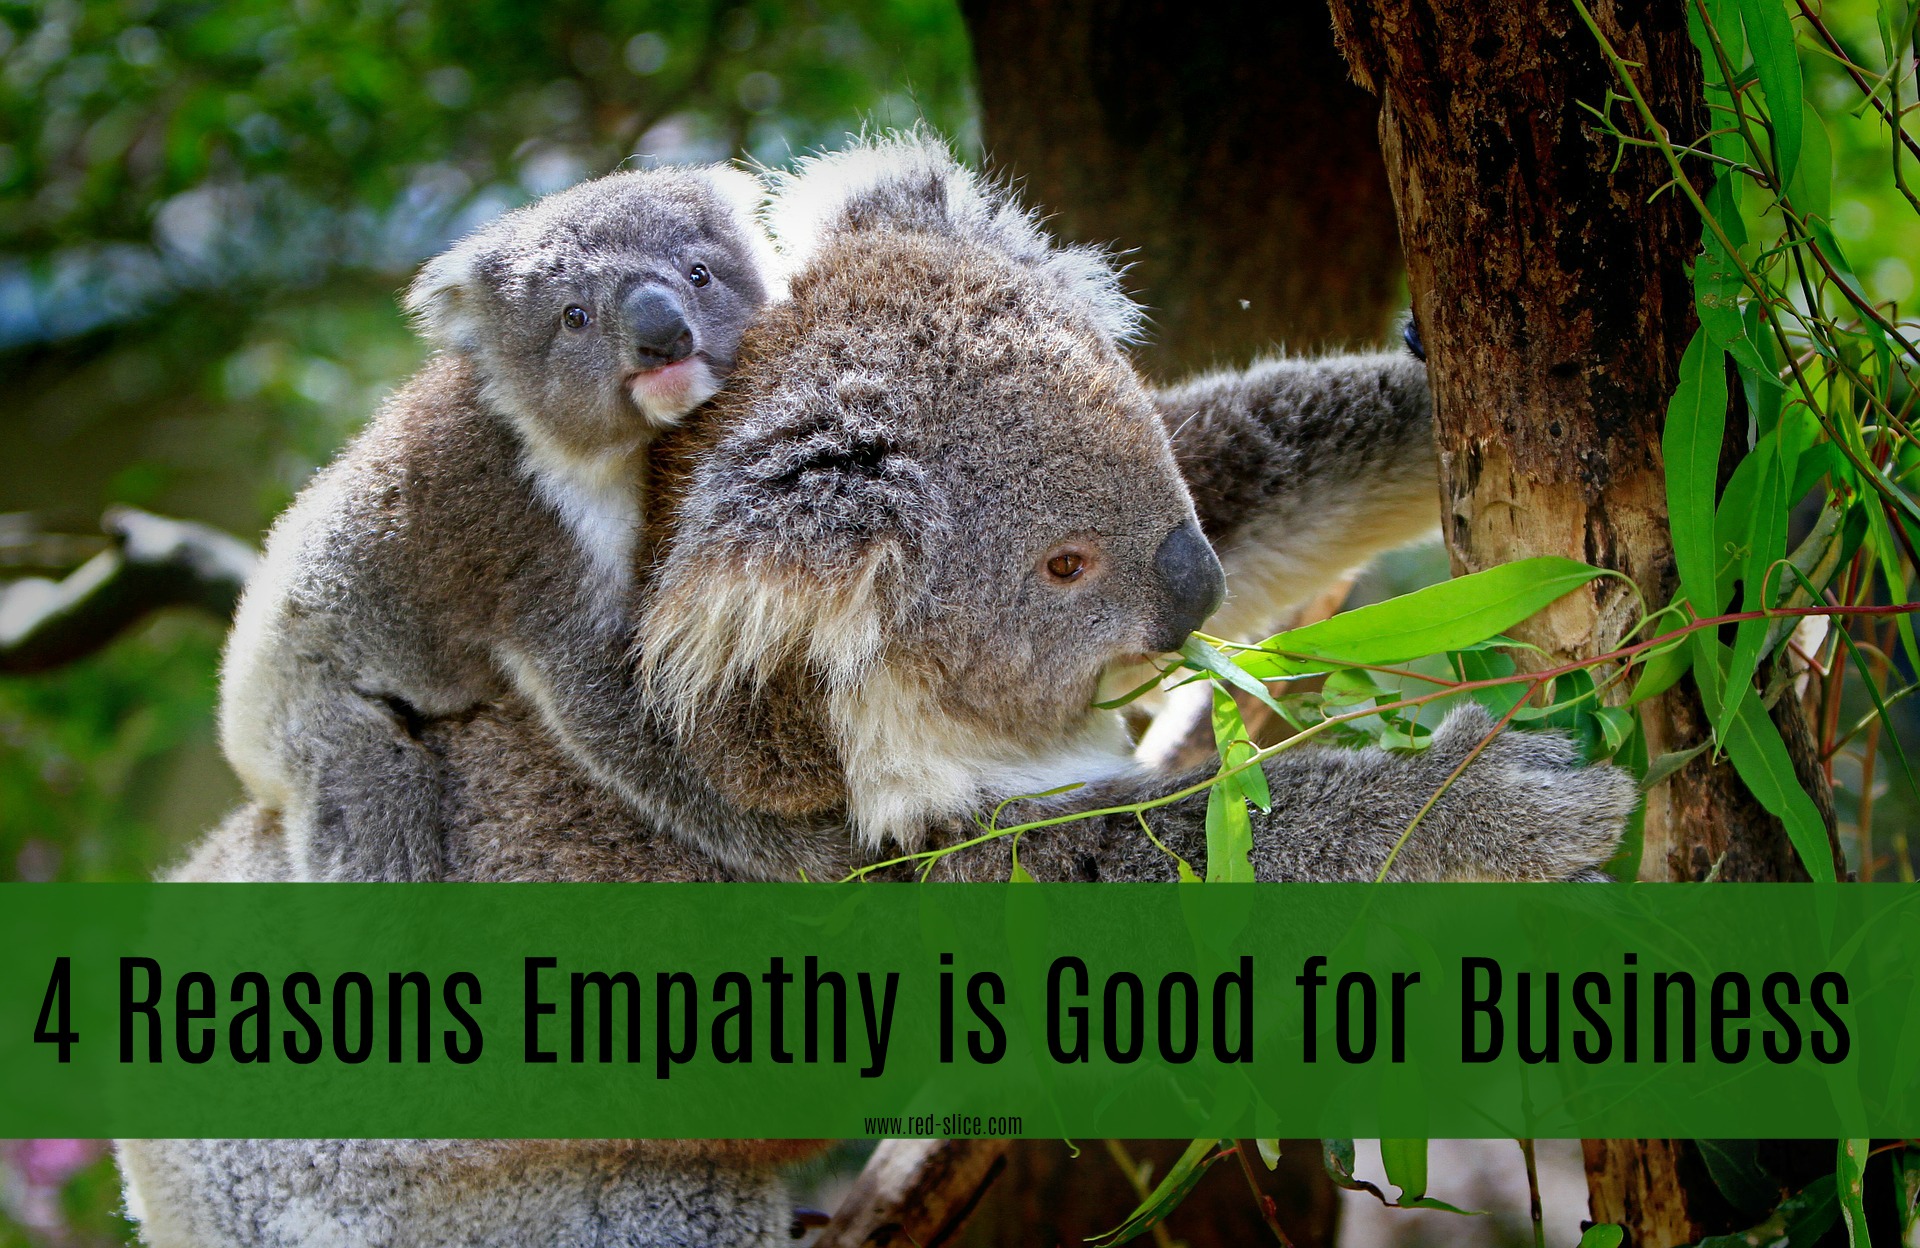 Why empathy is good for business (blog)